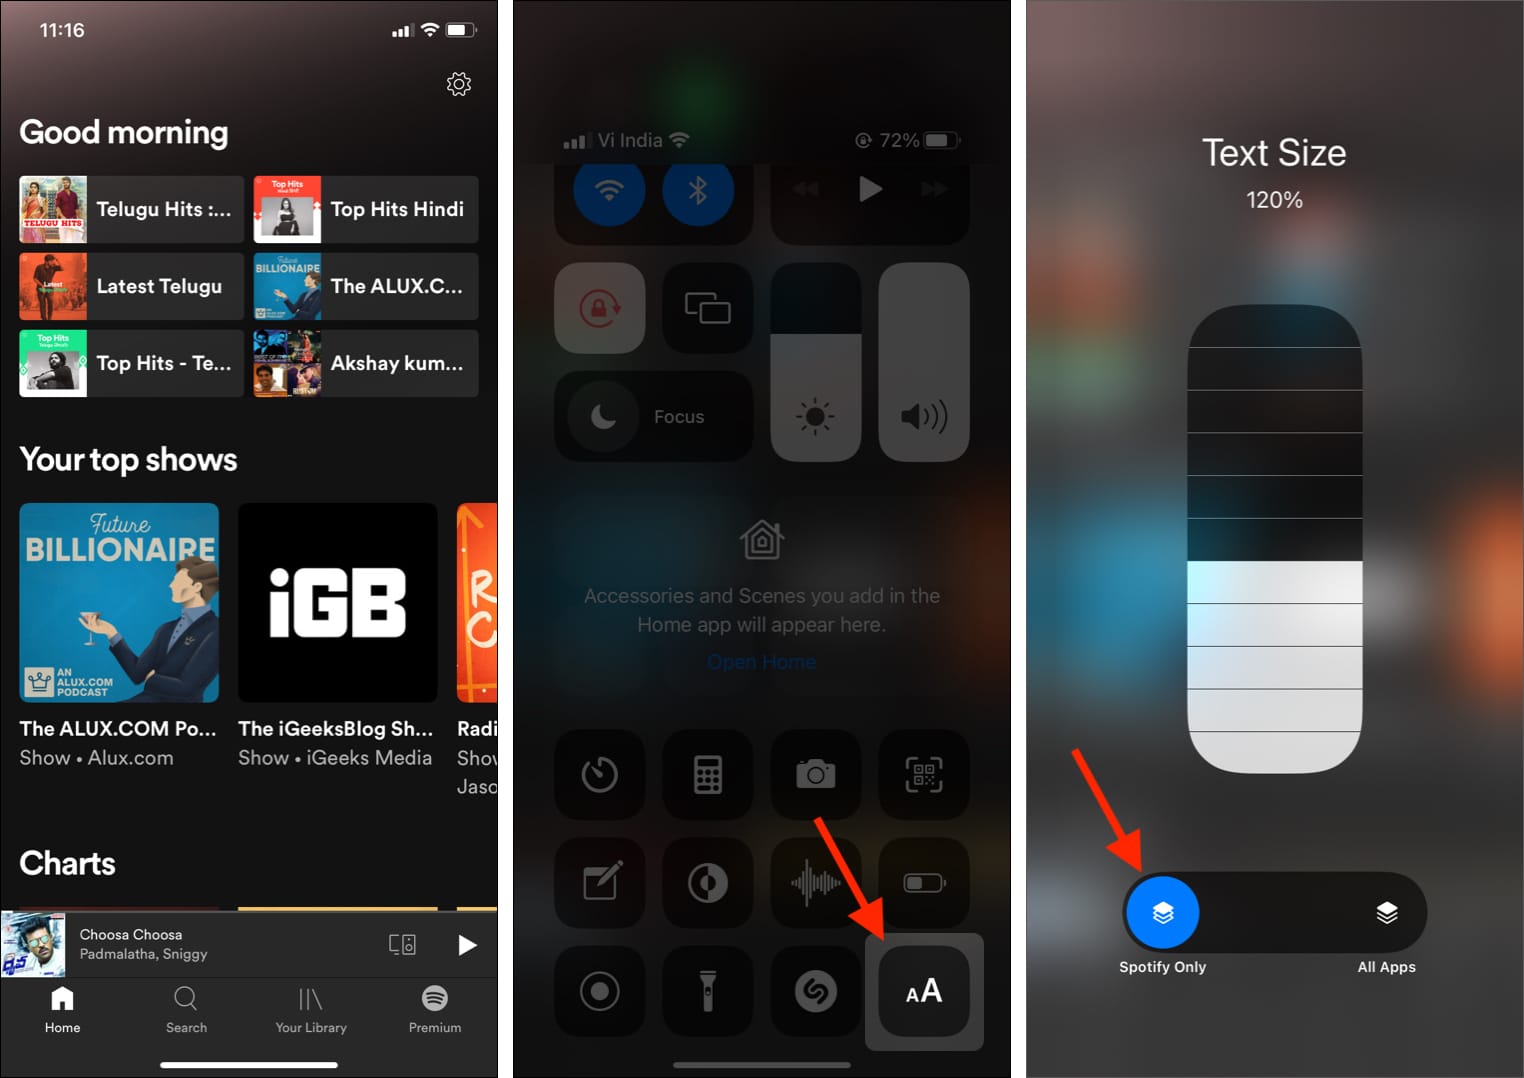 Open app bring Control Center tap AA tap app name and drag the text size slider up